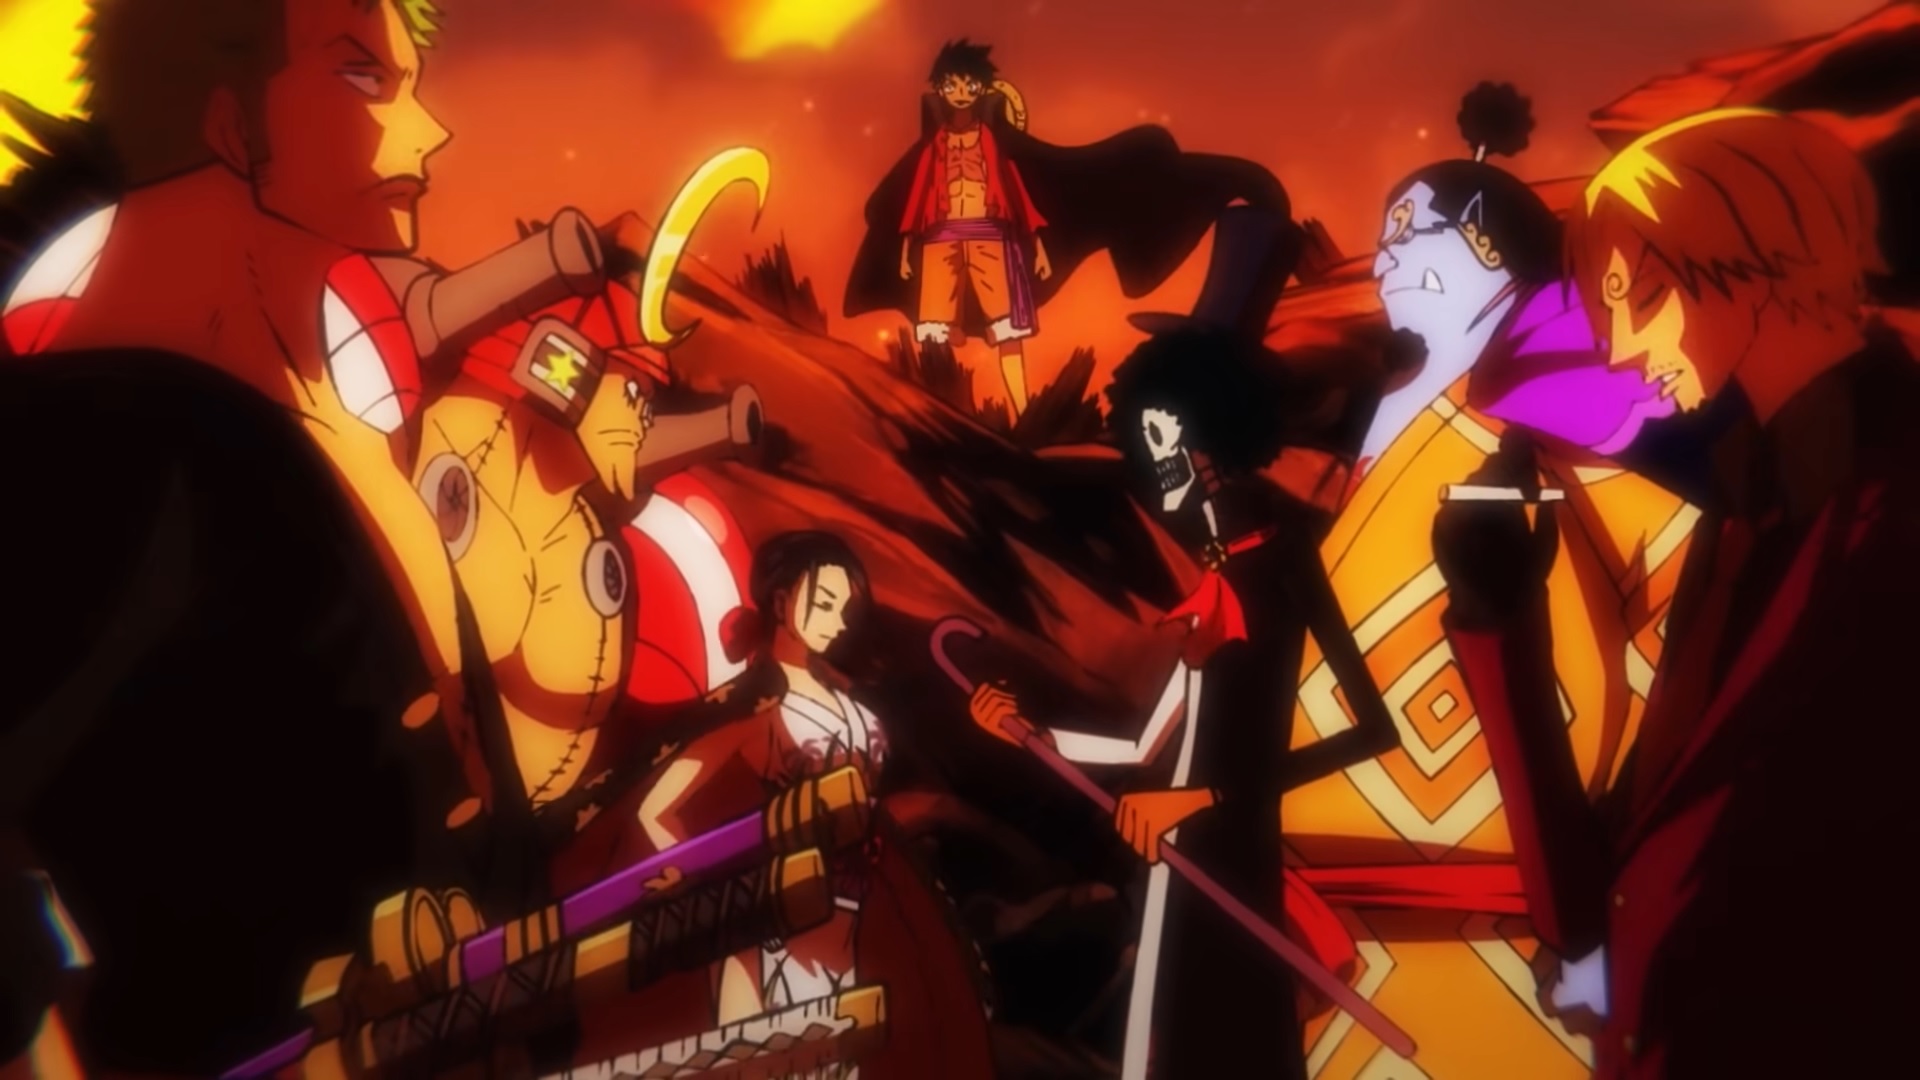 One Piece episode 1000: Release and official trailer is out